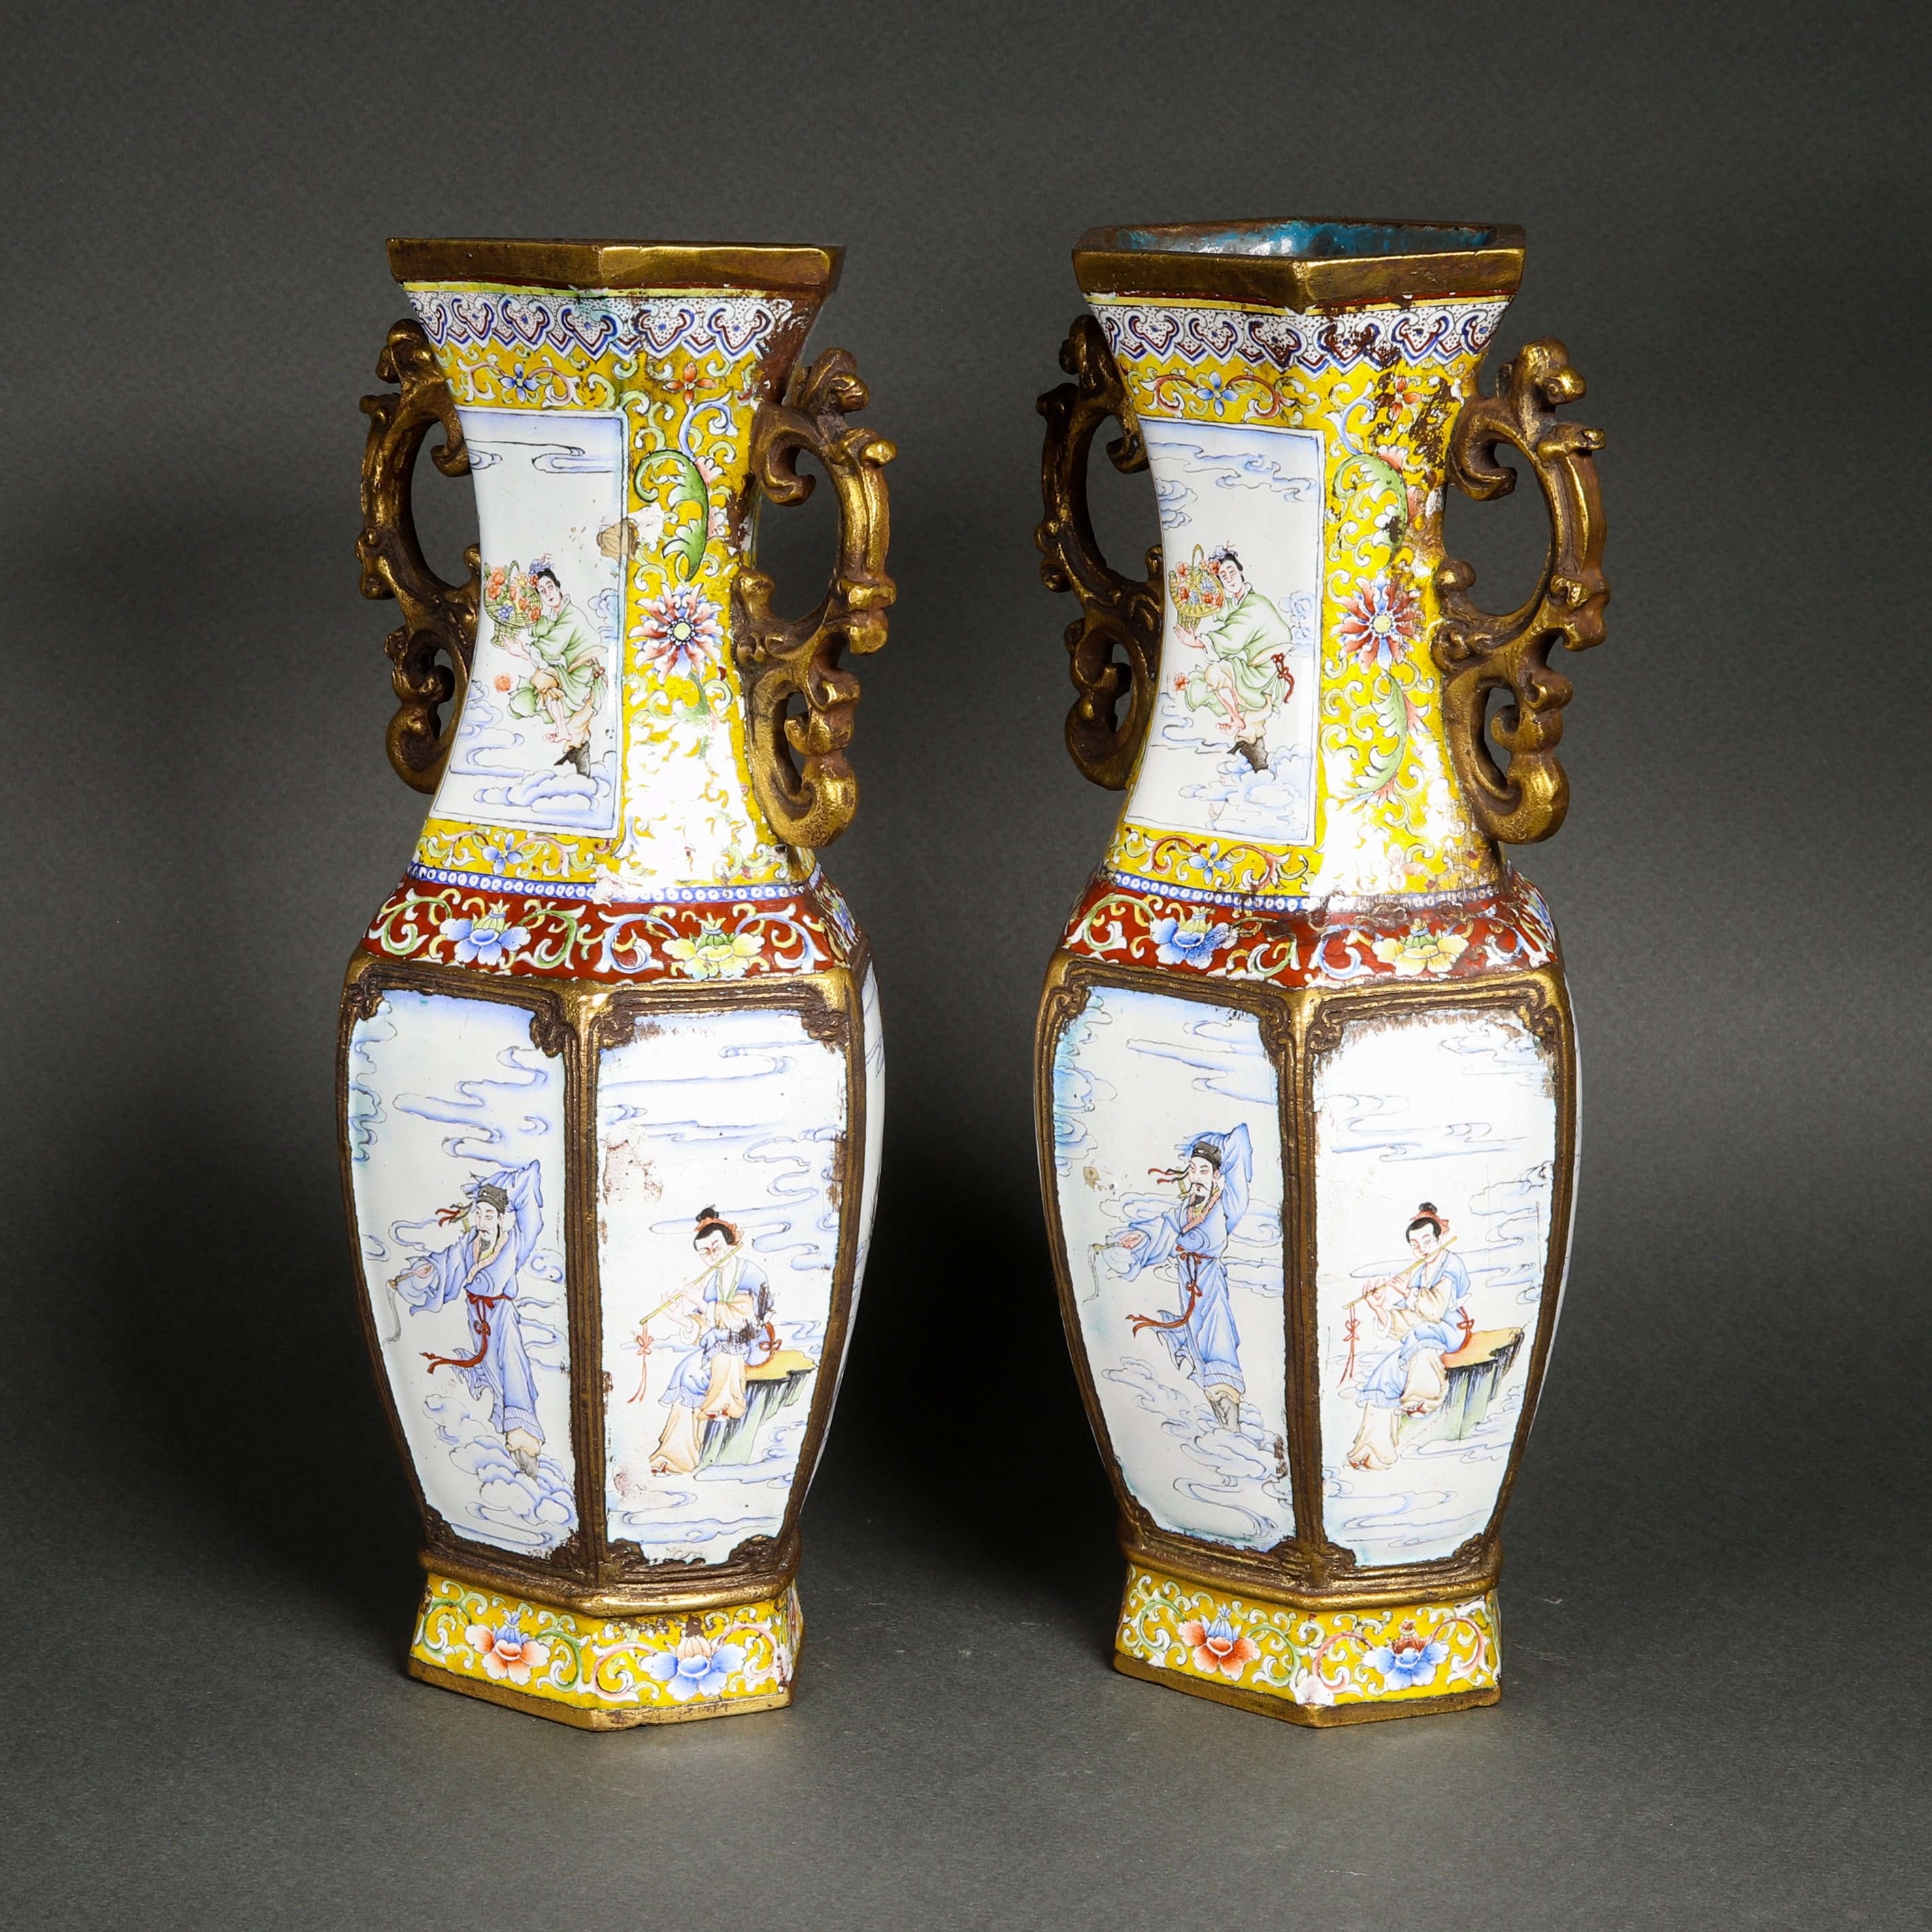 PAIR OF CHINESE CANTON ENAMEL VASES 3a4af5